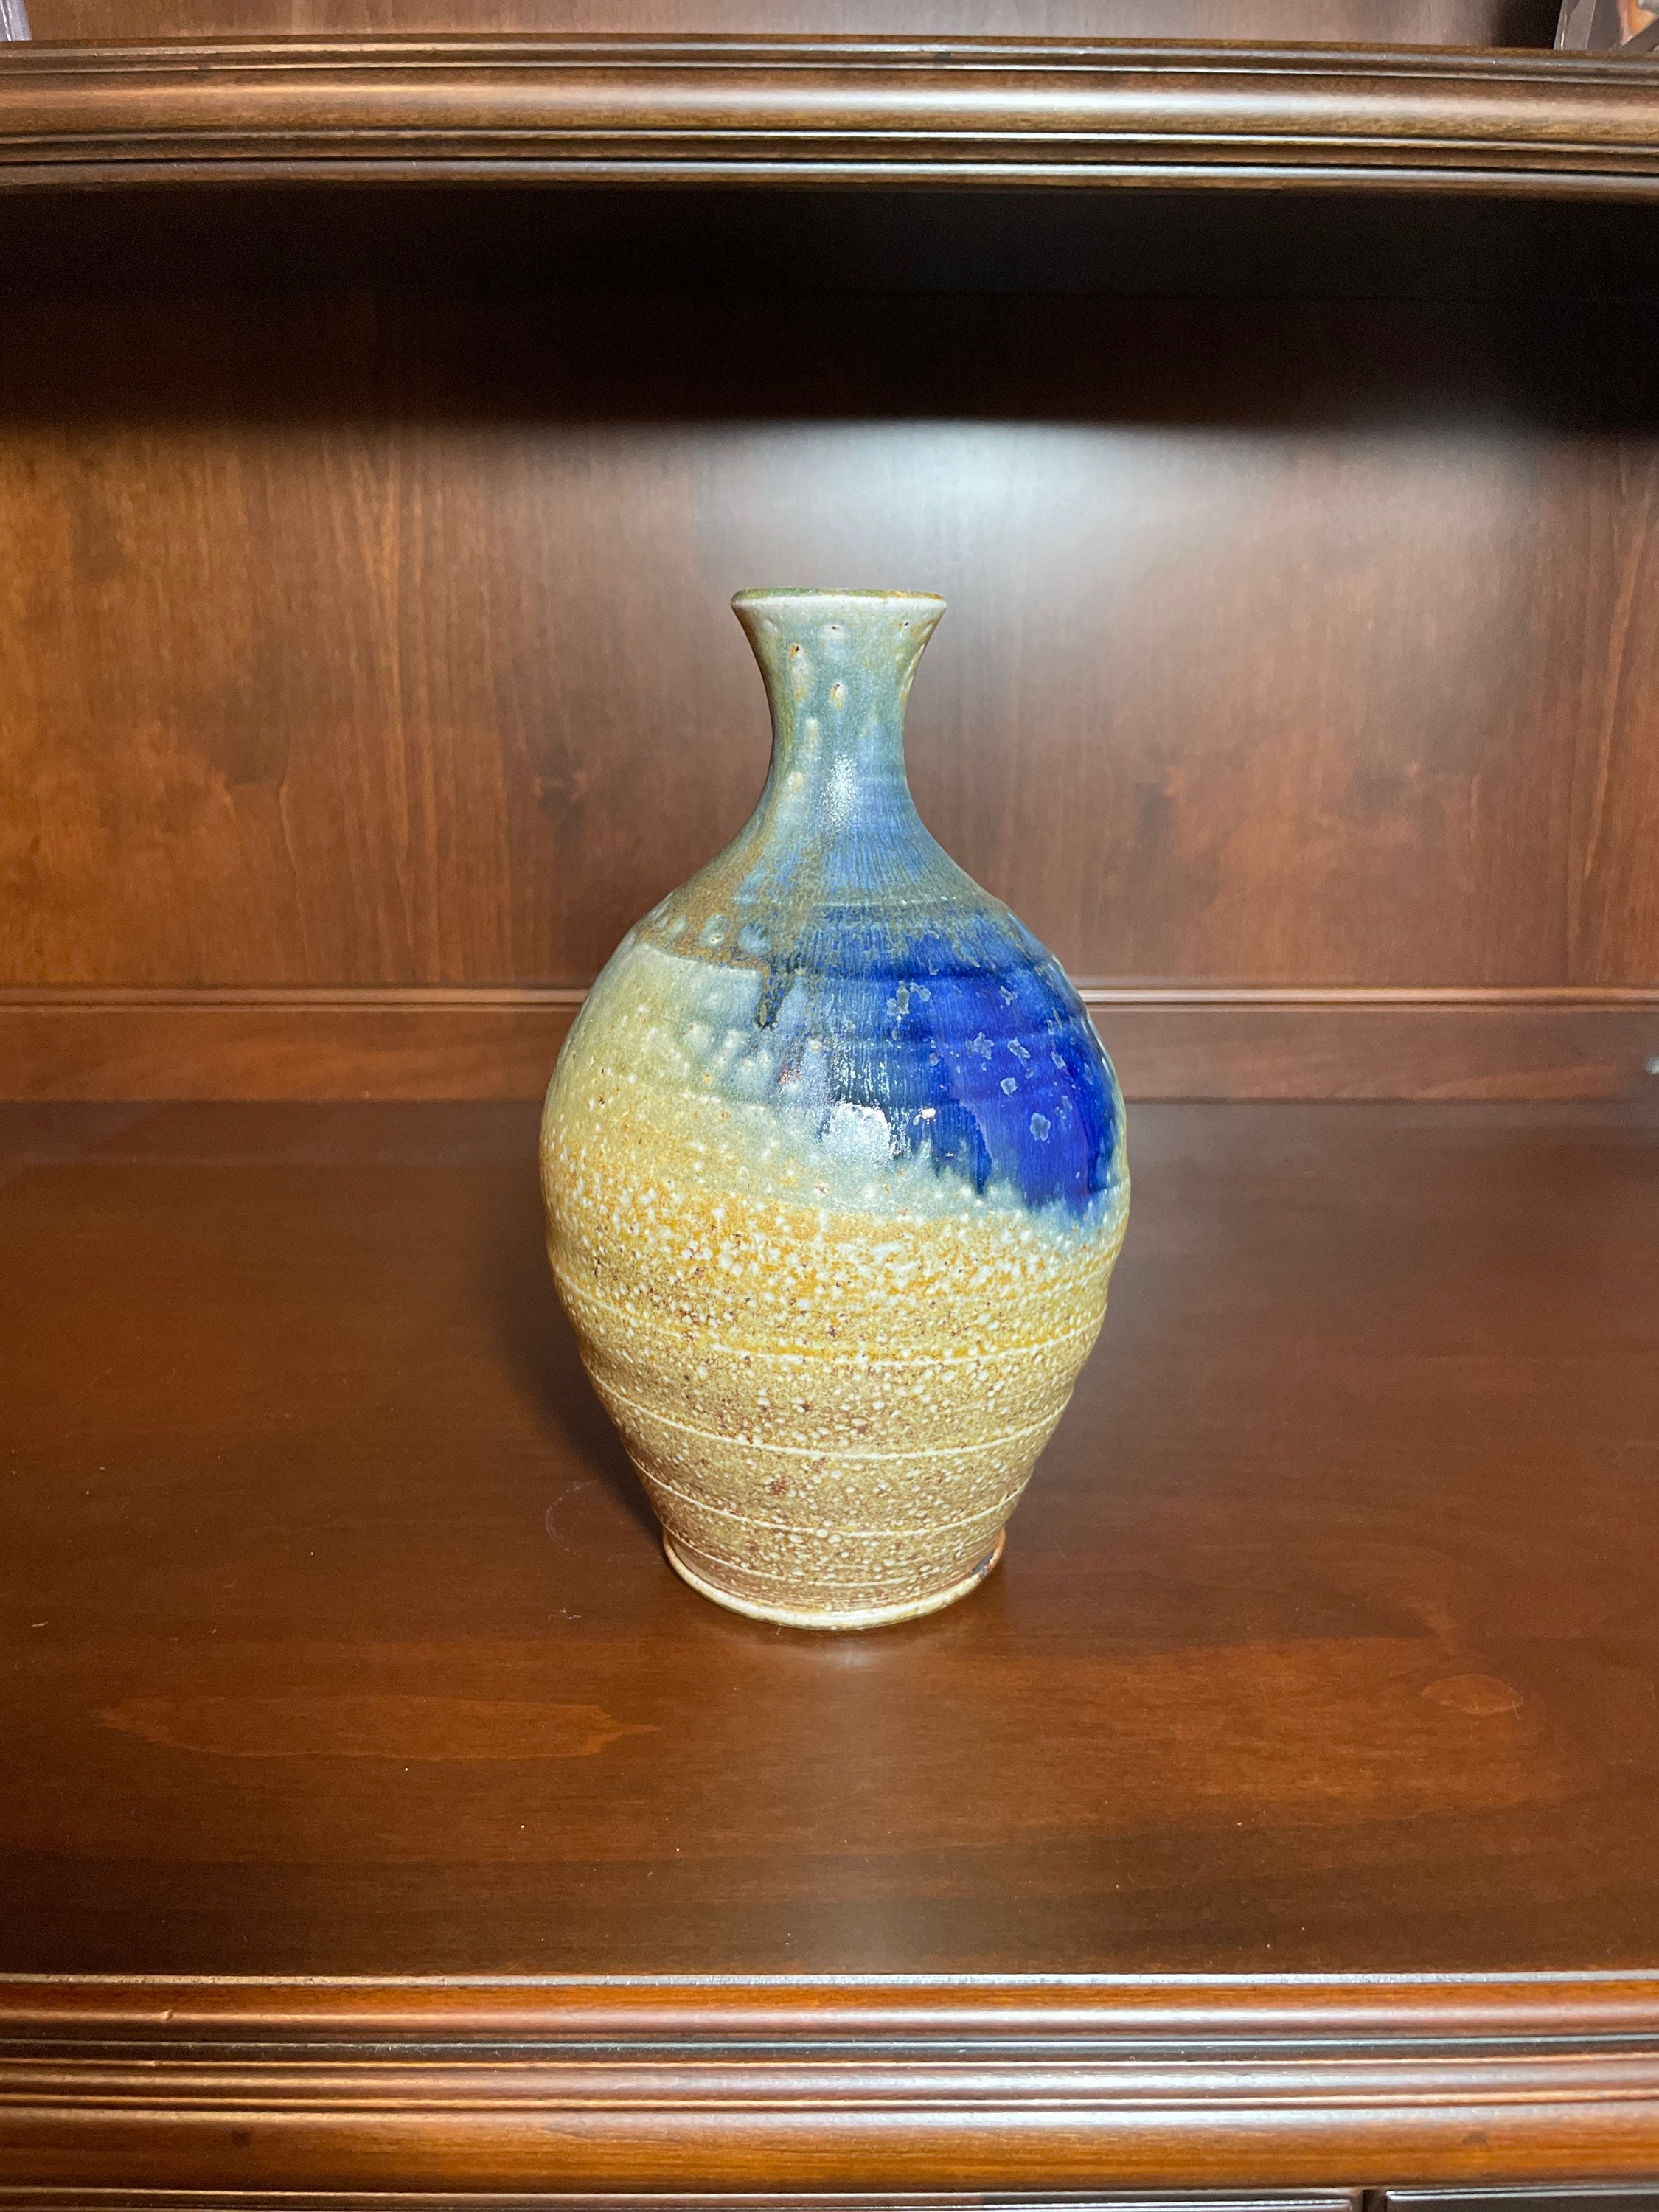 Swirled Vase with Blue Accent | Etsy